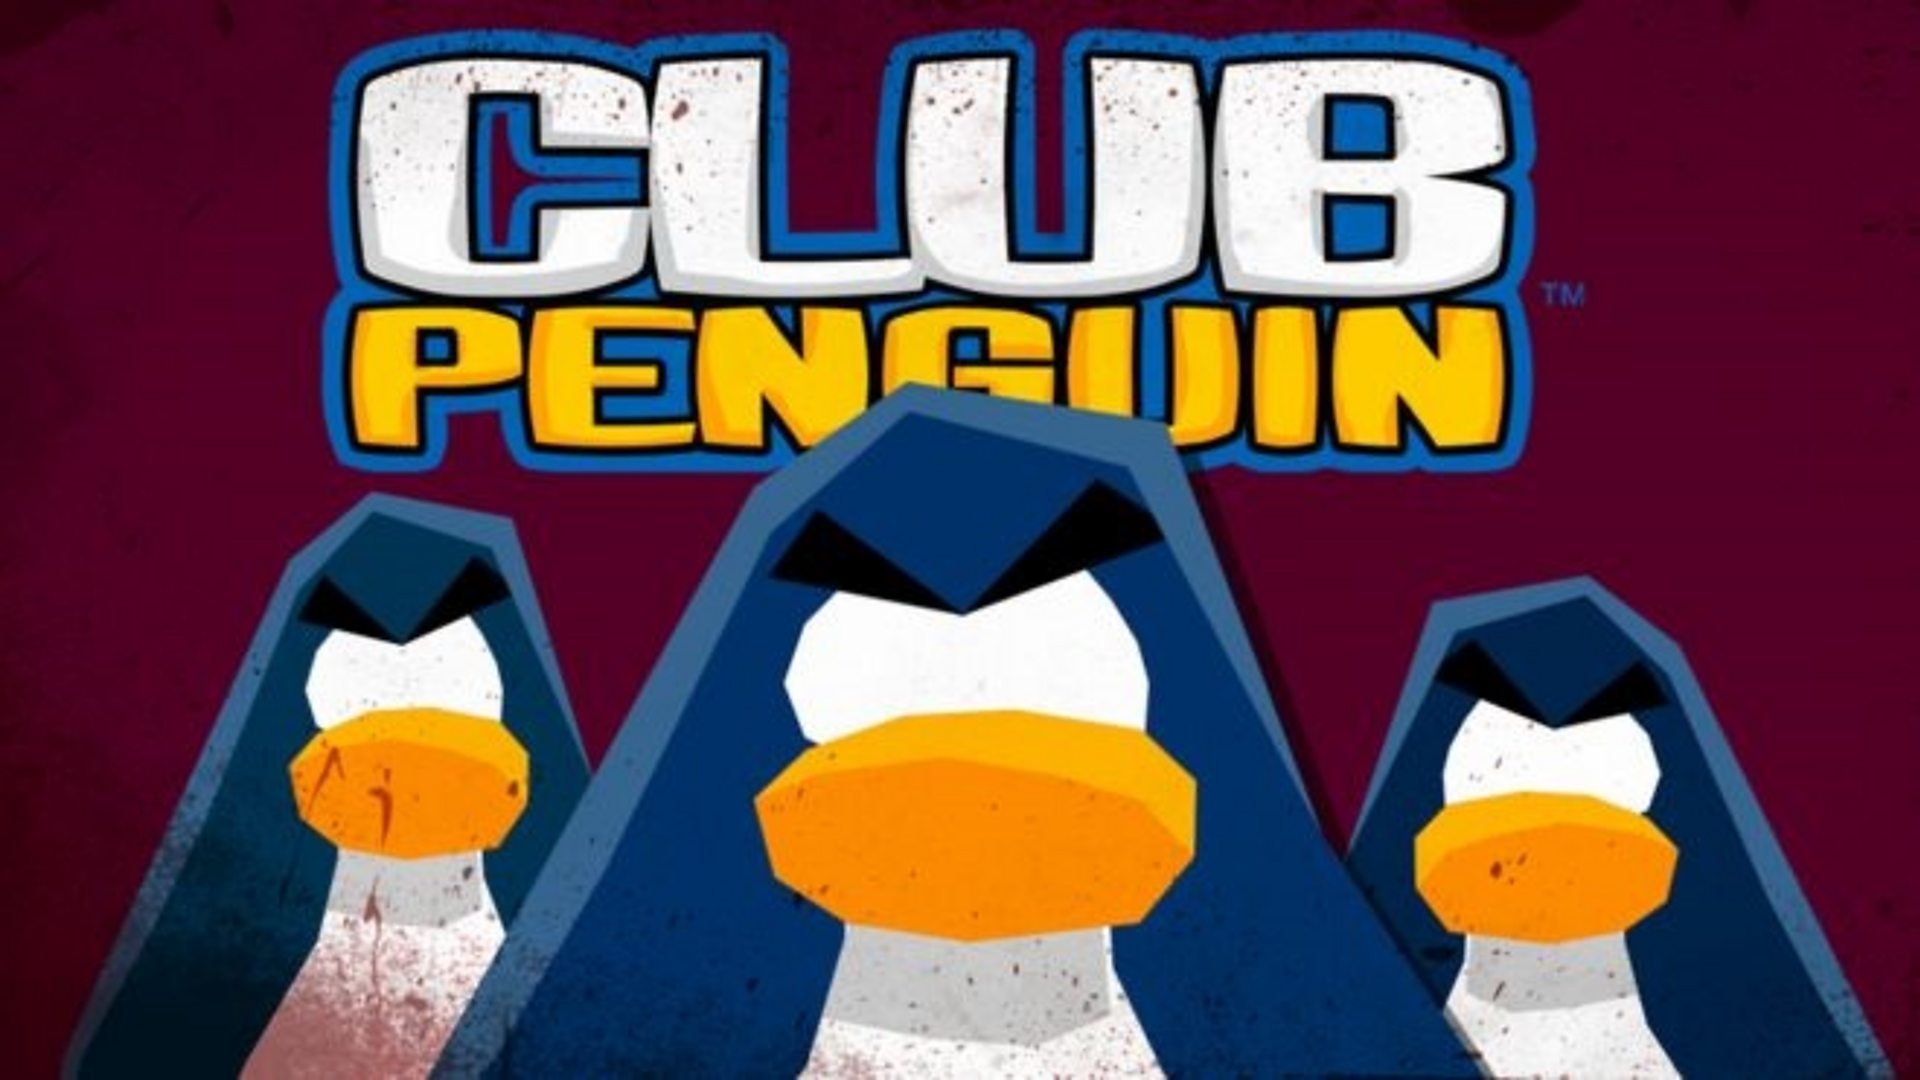 How an unofficial Club Penguin game turned toxic - BBC News